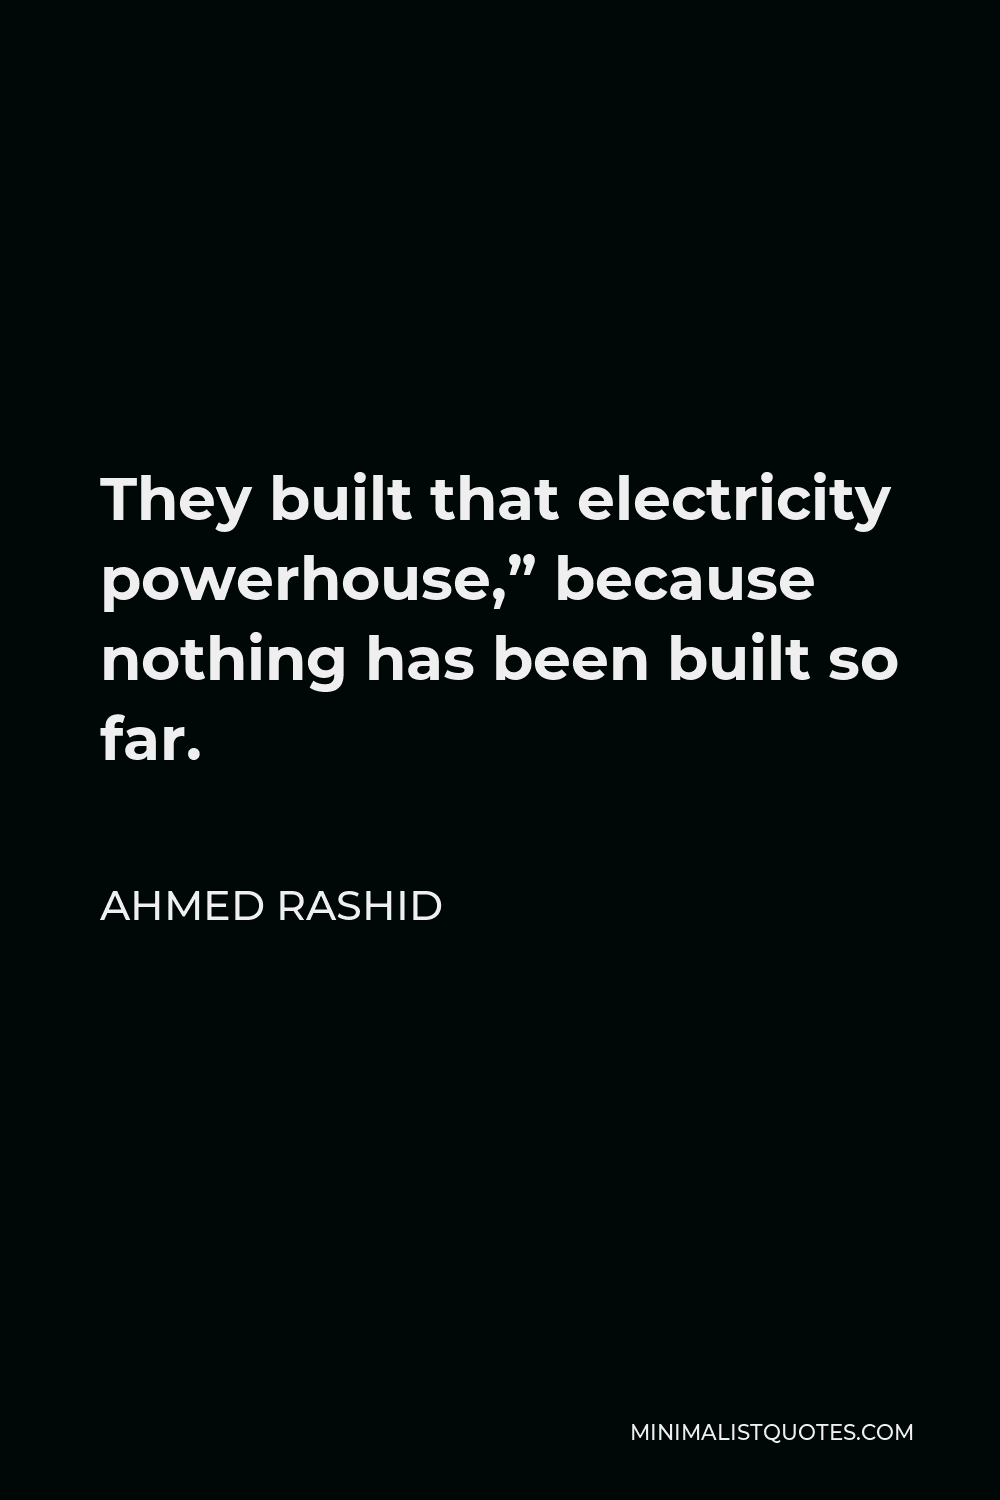 Ahmed Rashid Quote - They built that electricity powerhouse,” because nothing has been built so far.